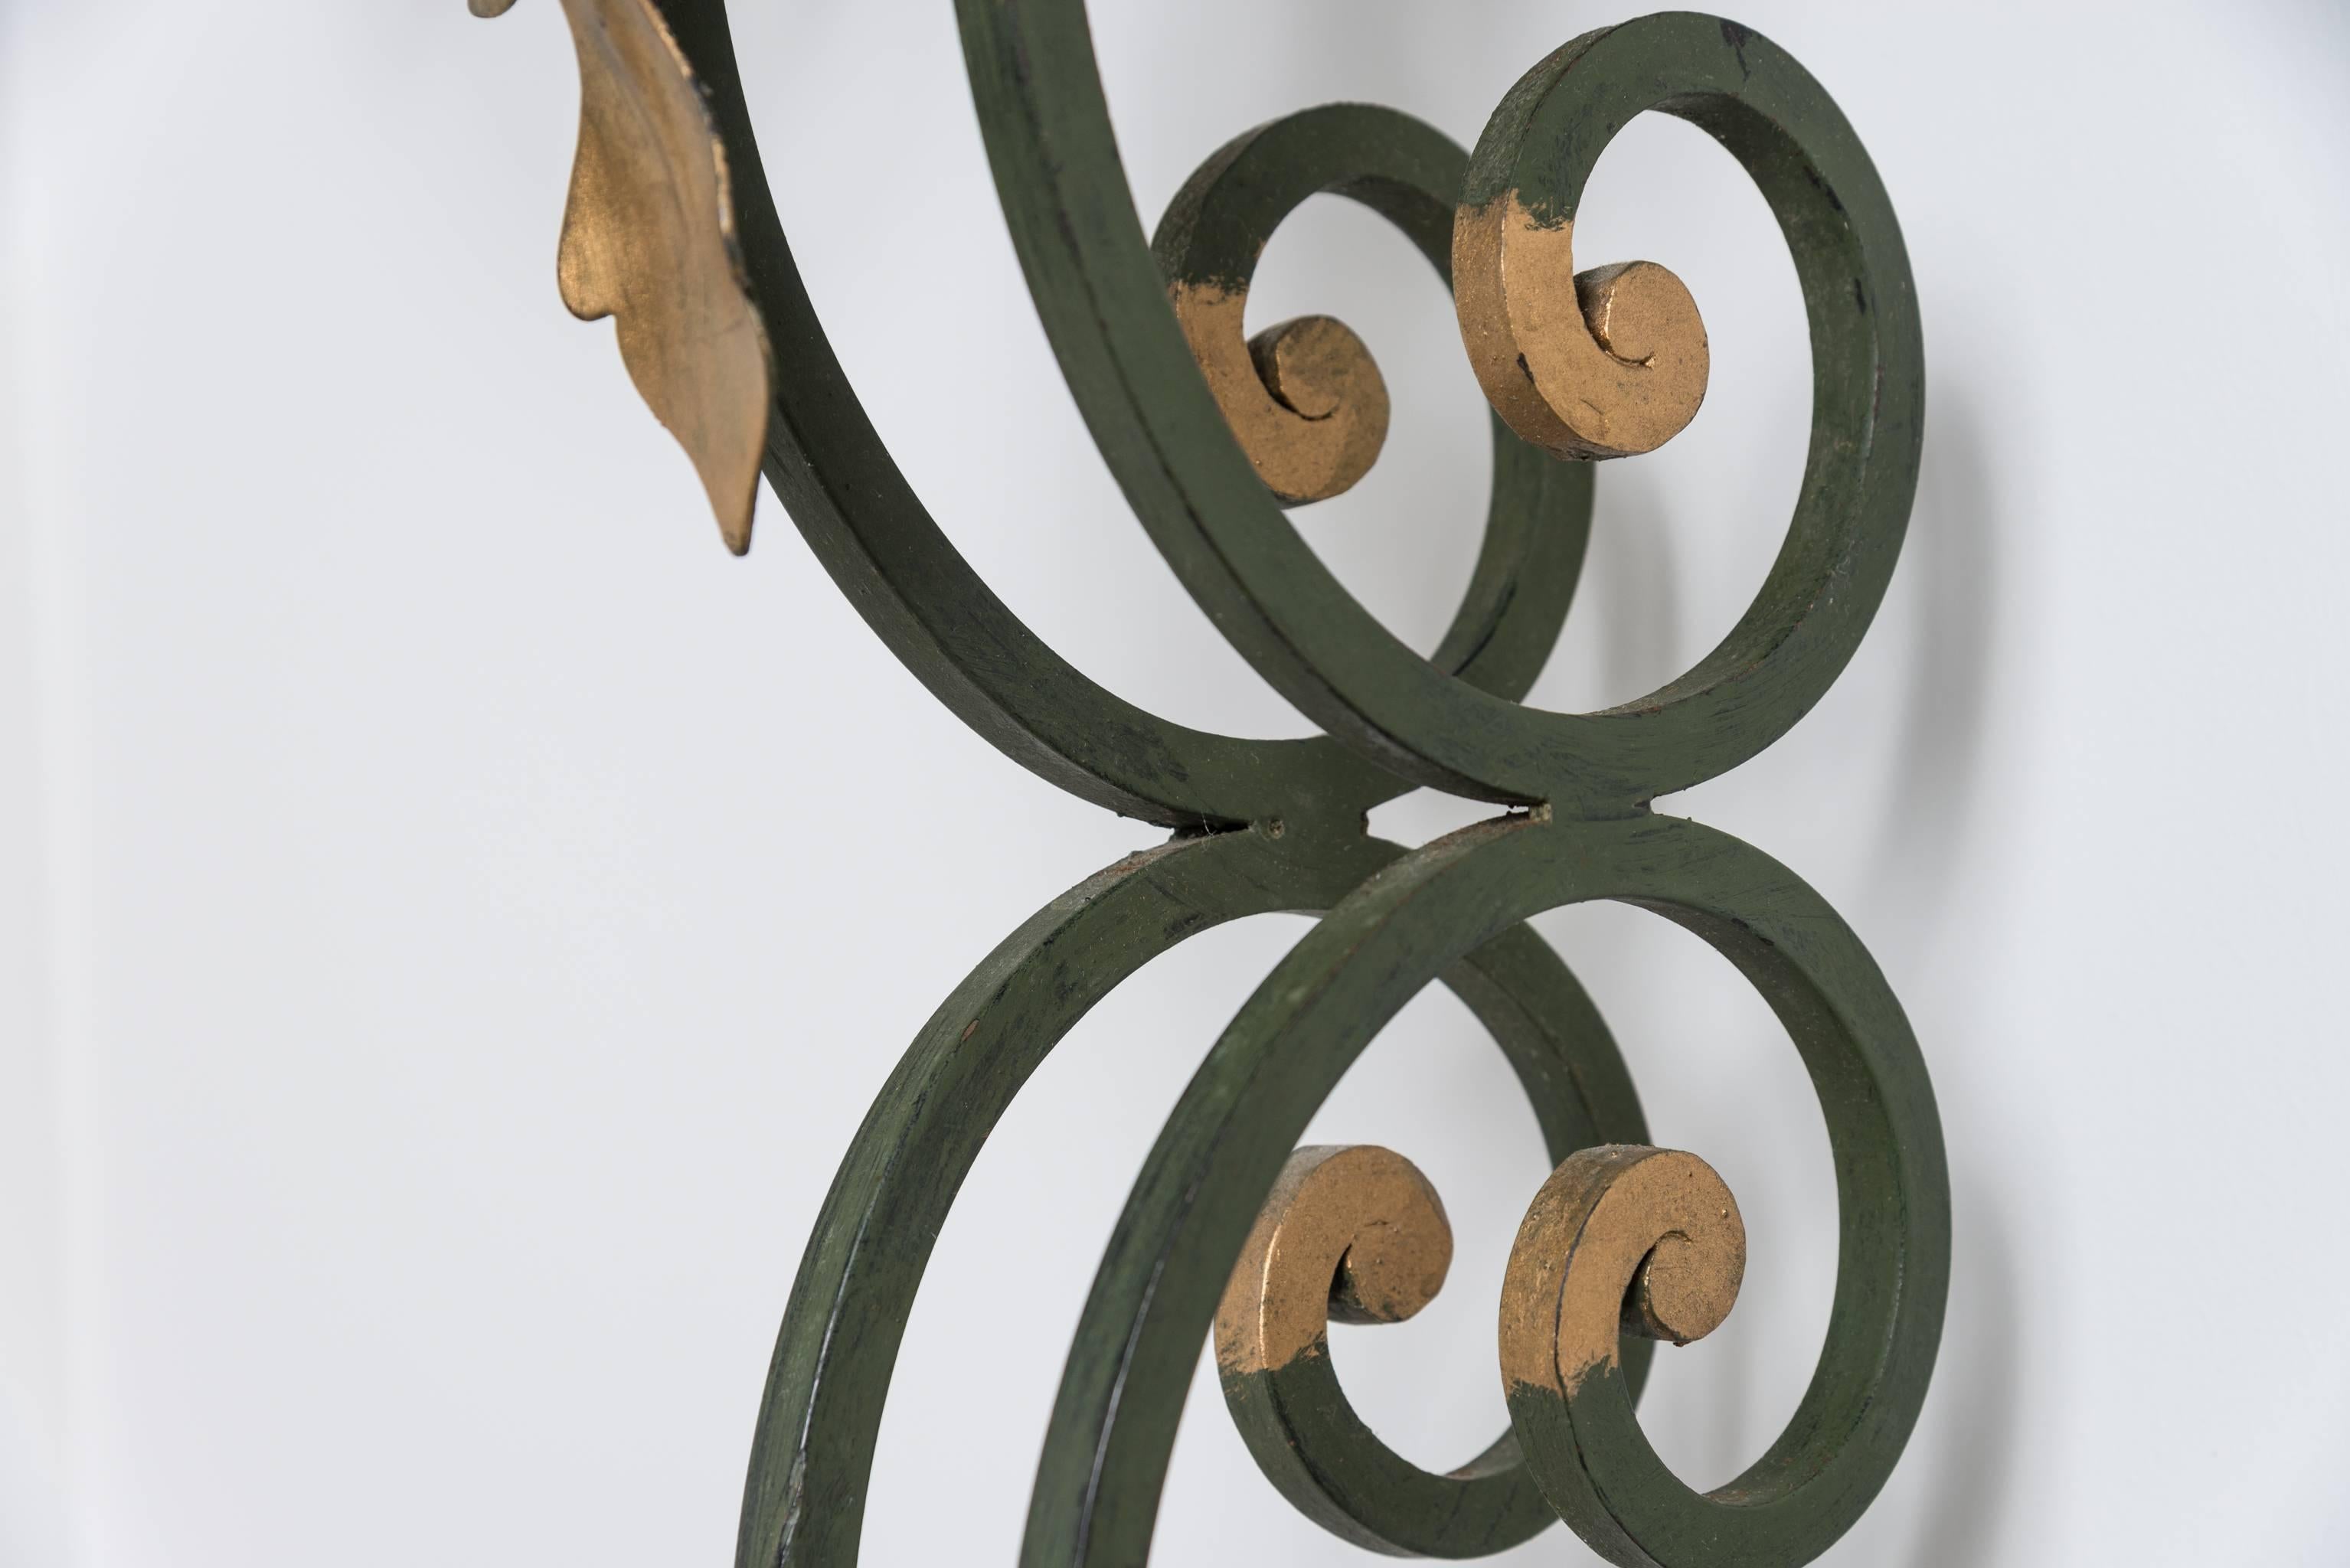 This set of Louis XV style wall hung demilune consoles date from the 1920s-1930s and were purchased in France. The stylized half of a cupids-bow central support and apron are wrought iron with a Verdi green painted finish and the acanthus leaves are